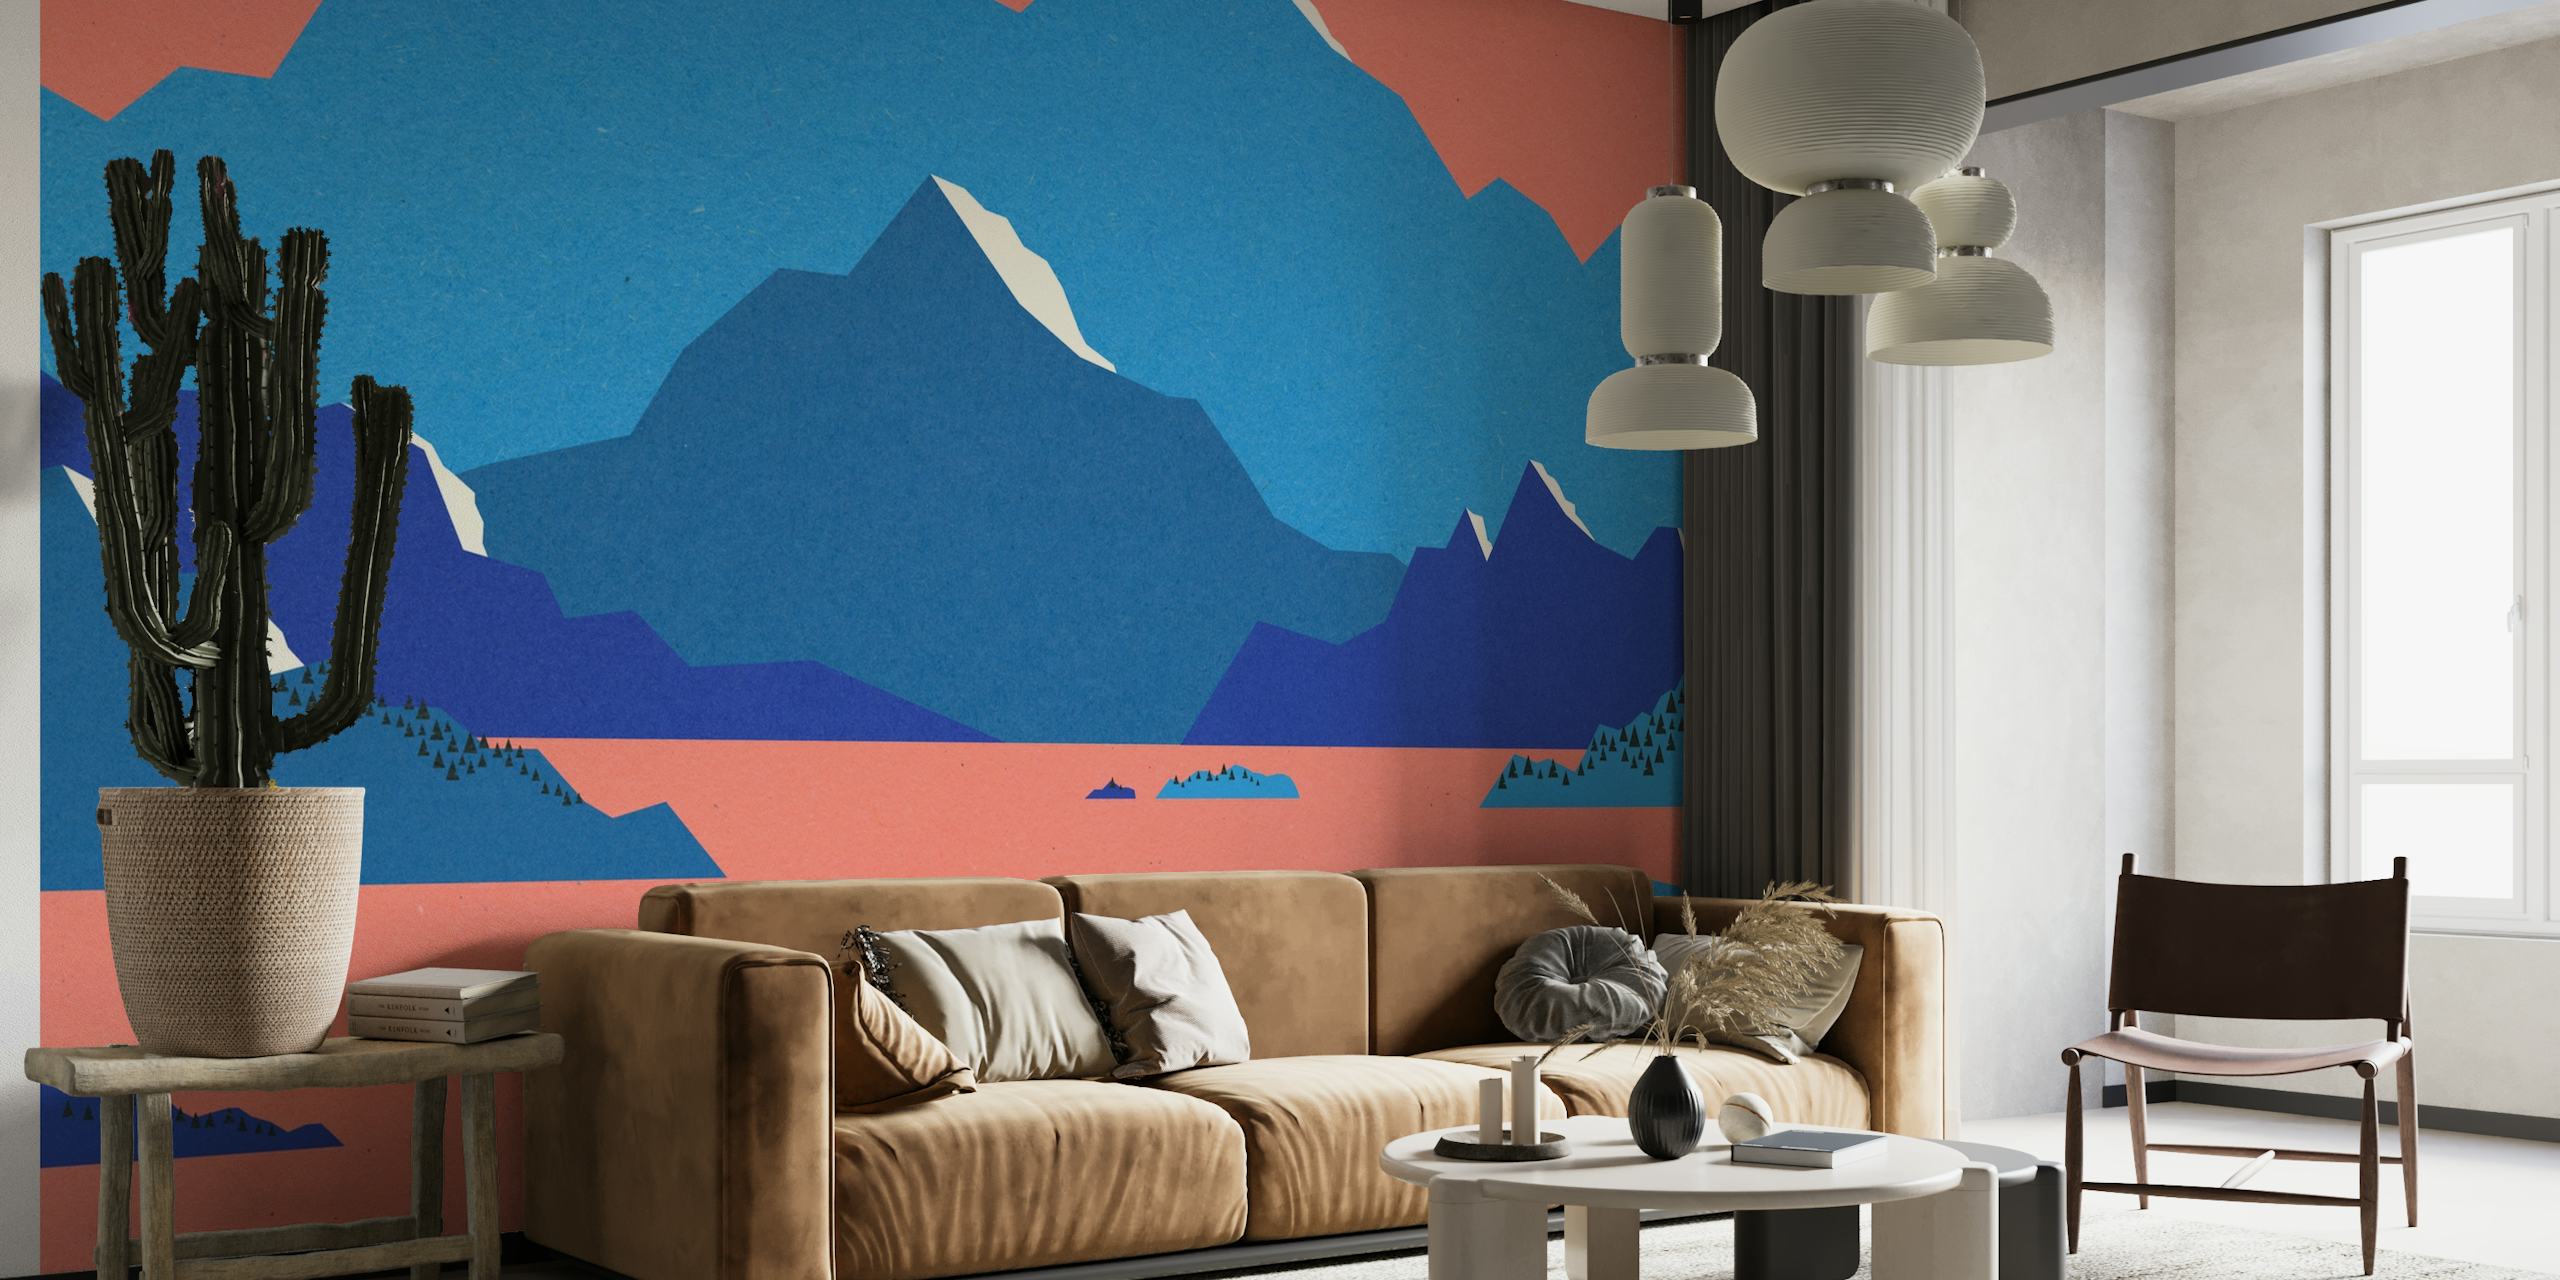 Stylized Scandinavian mountain landscape wall mural with blue peaks and coral sky